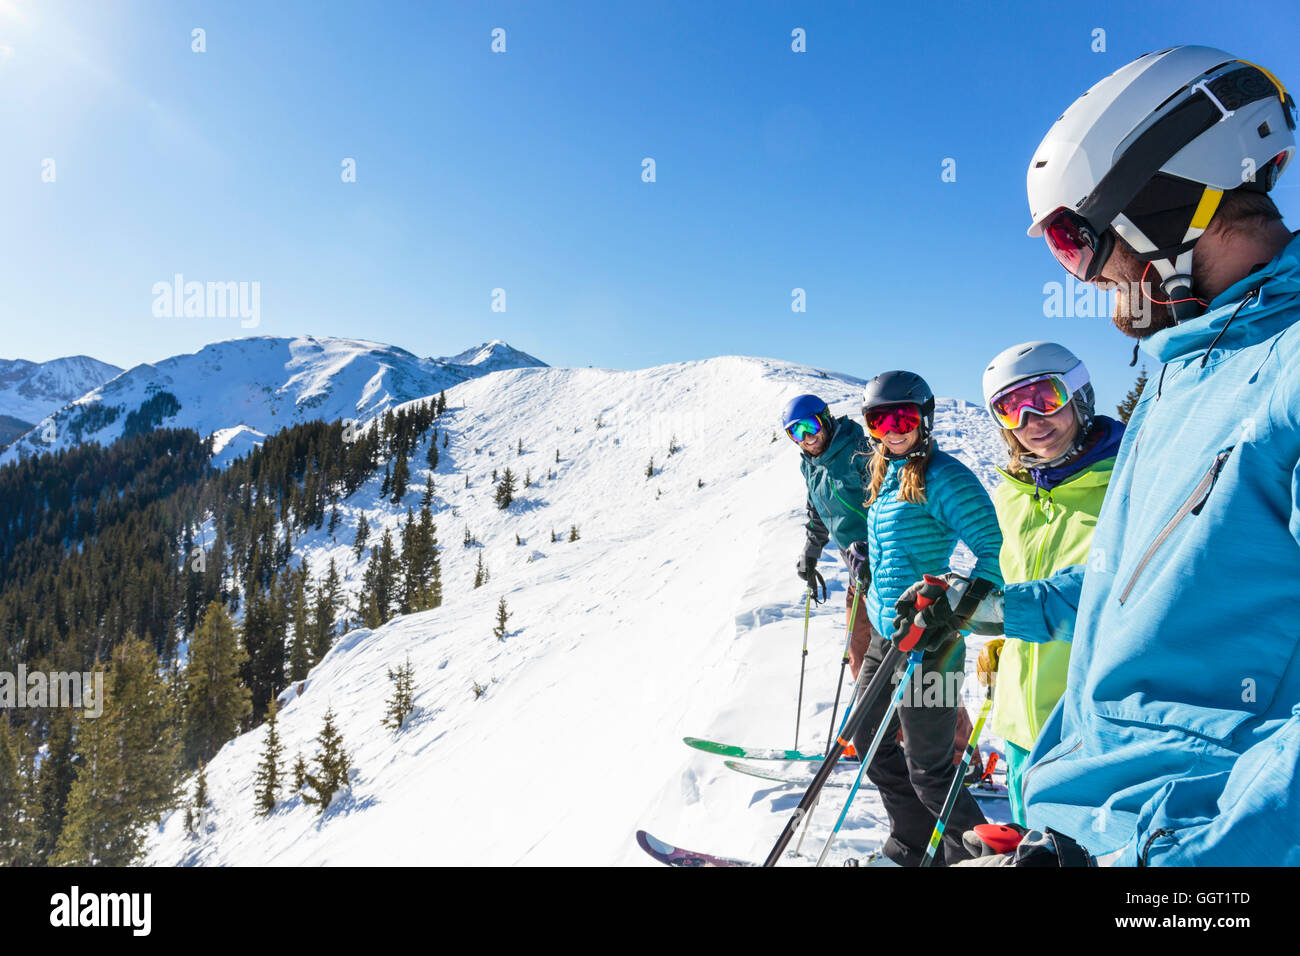 Friends on skis standing on snowy mountaintop Stock Photo